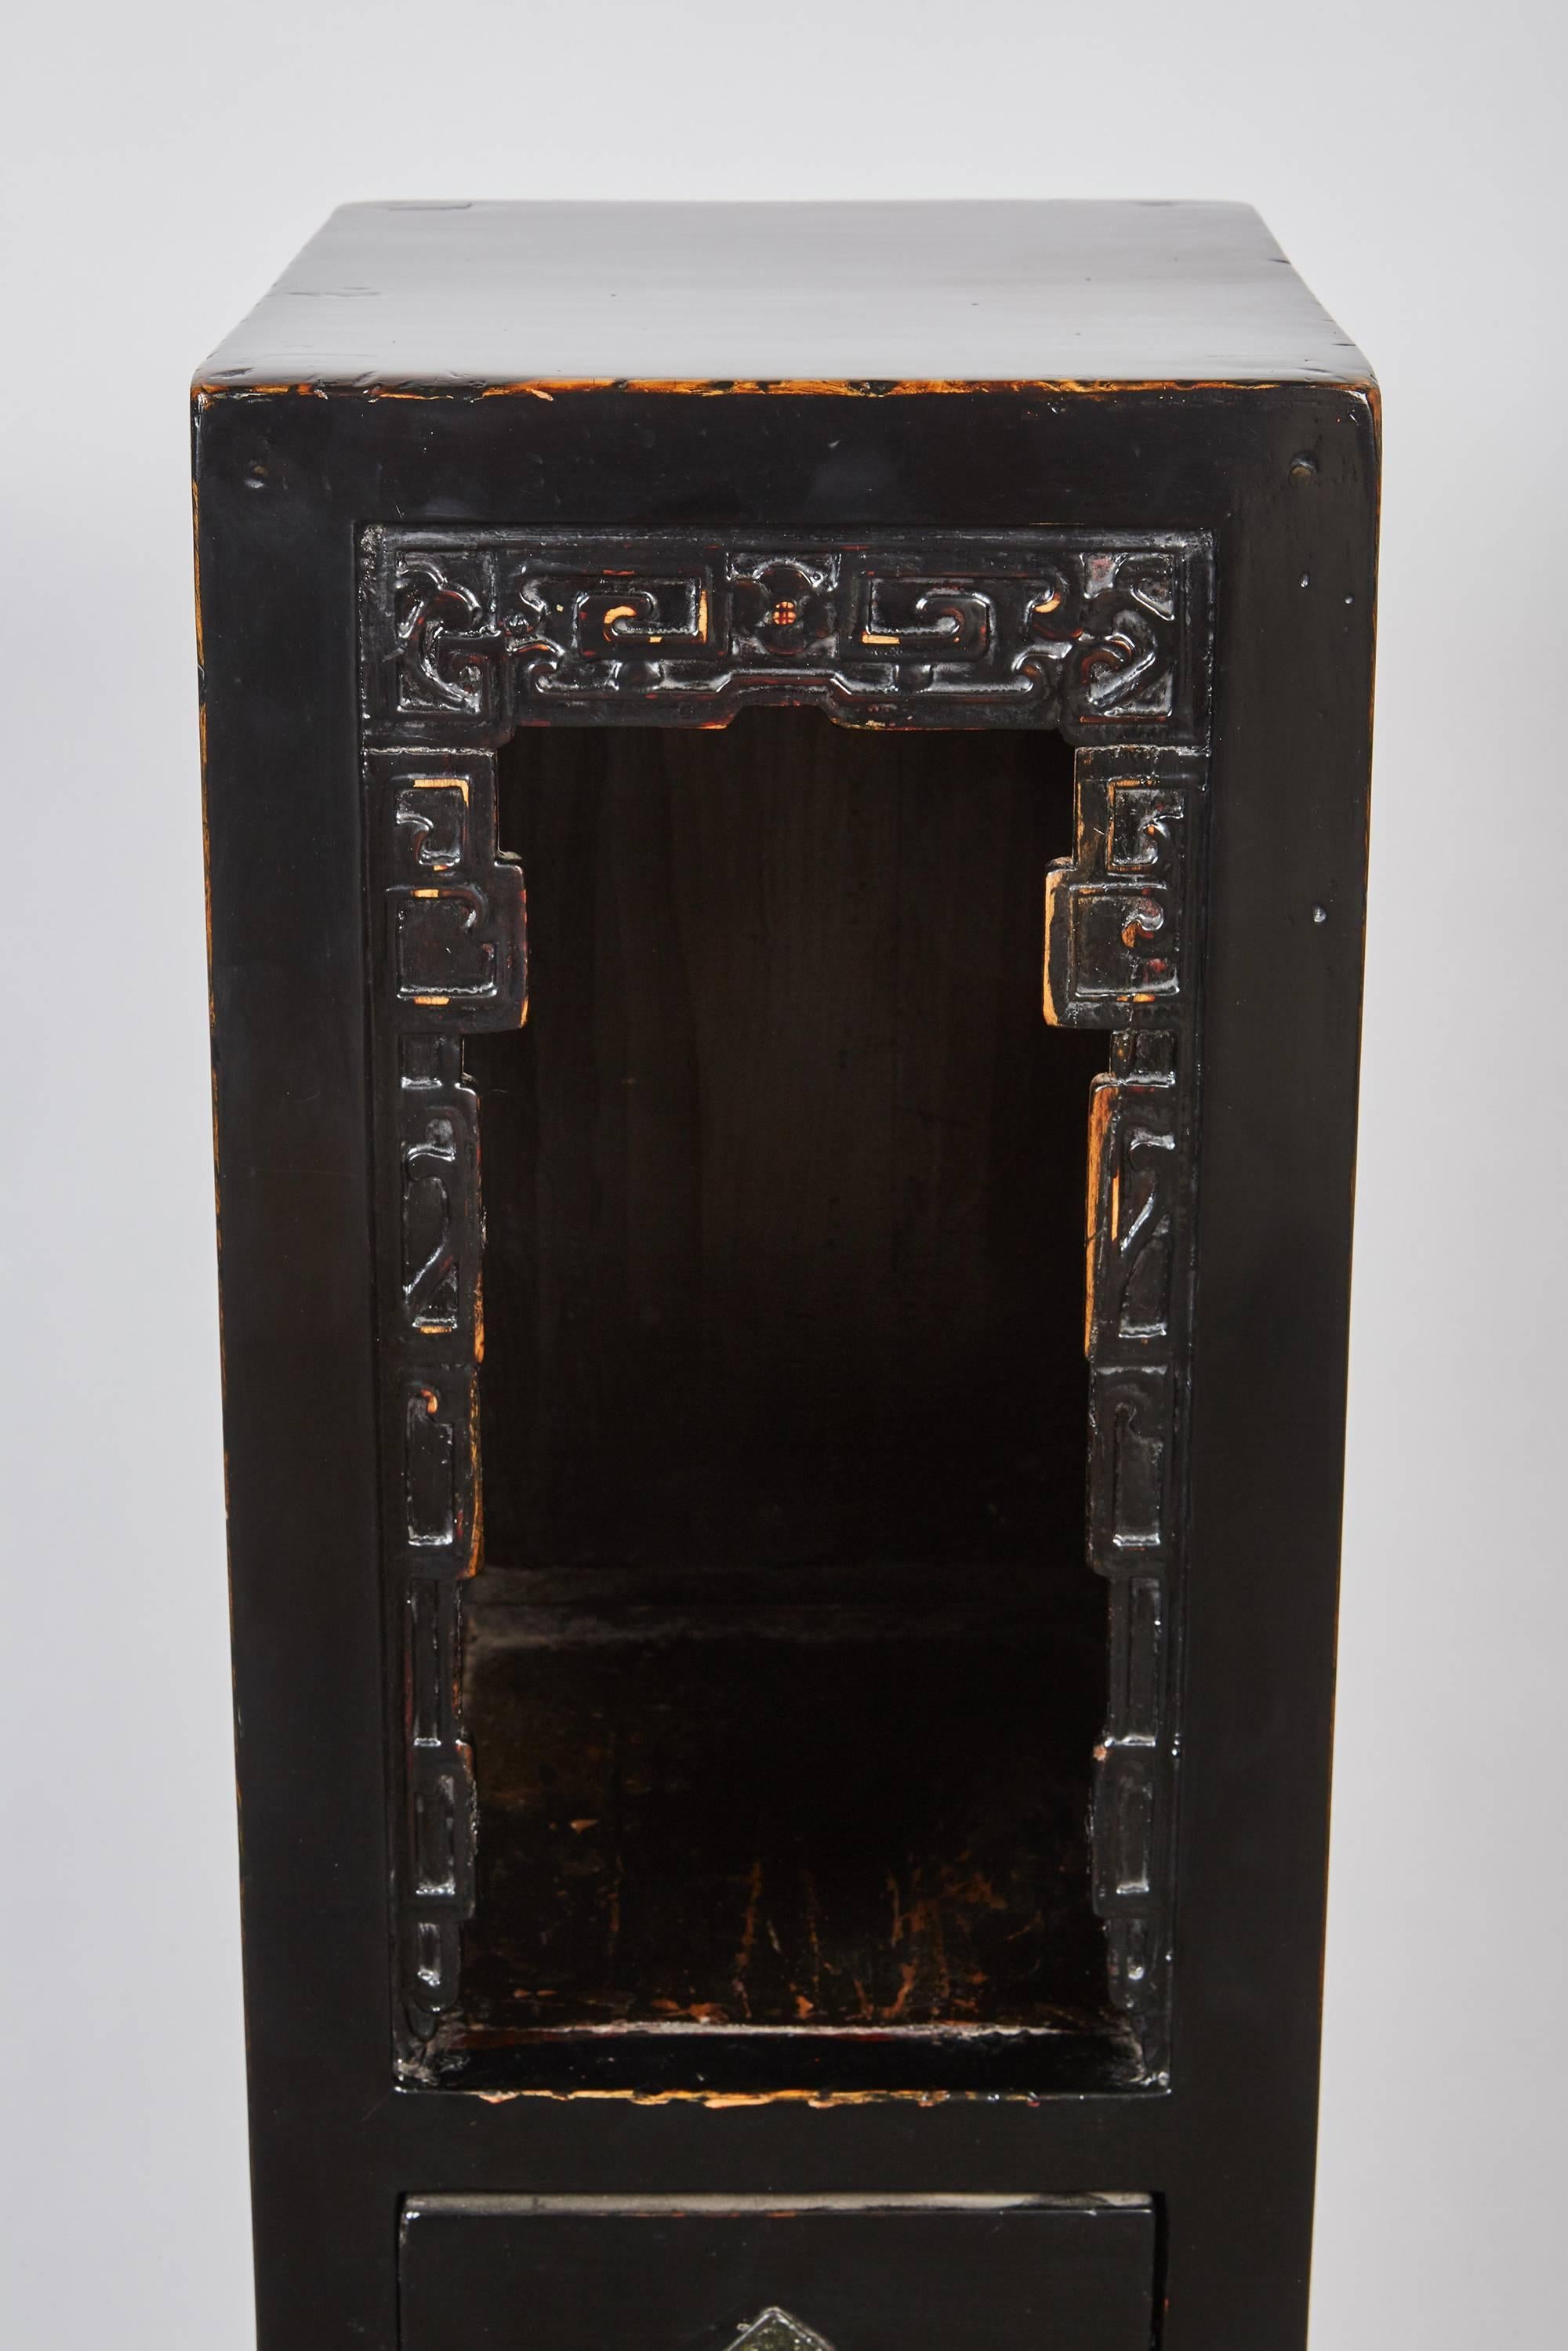 A one of a kind late 18th century Chinese, Qing dynasty black lacquer one door, one drawer tall tea table that has beautifully carved designs in the shelving area just above the drawer and door with brass hardware.